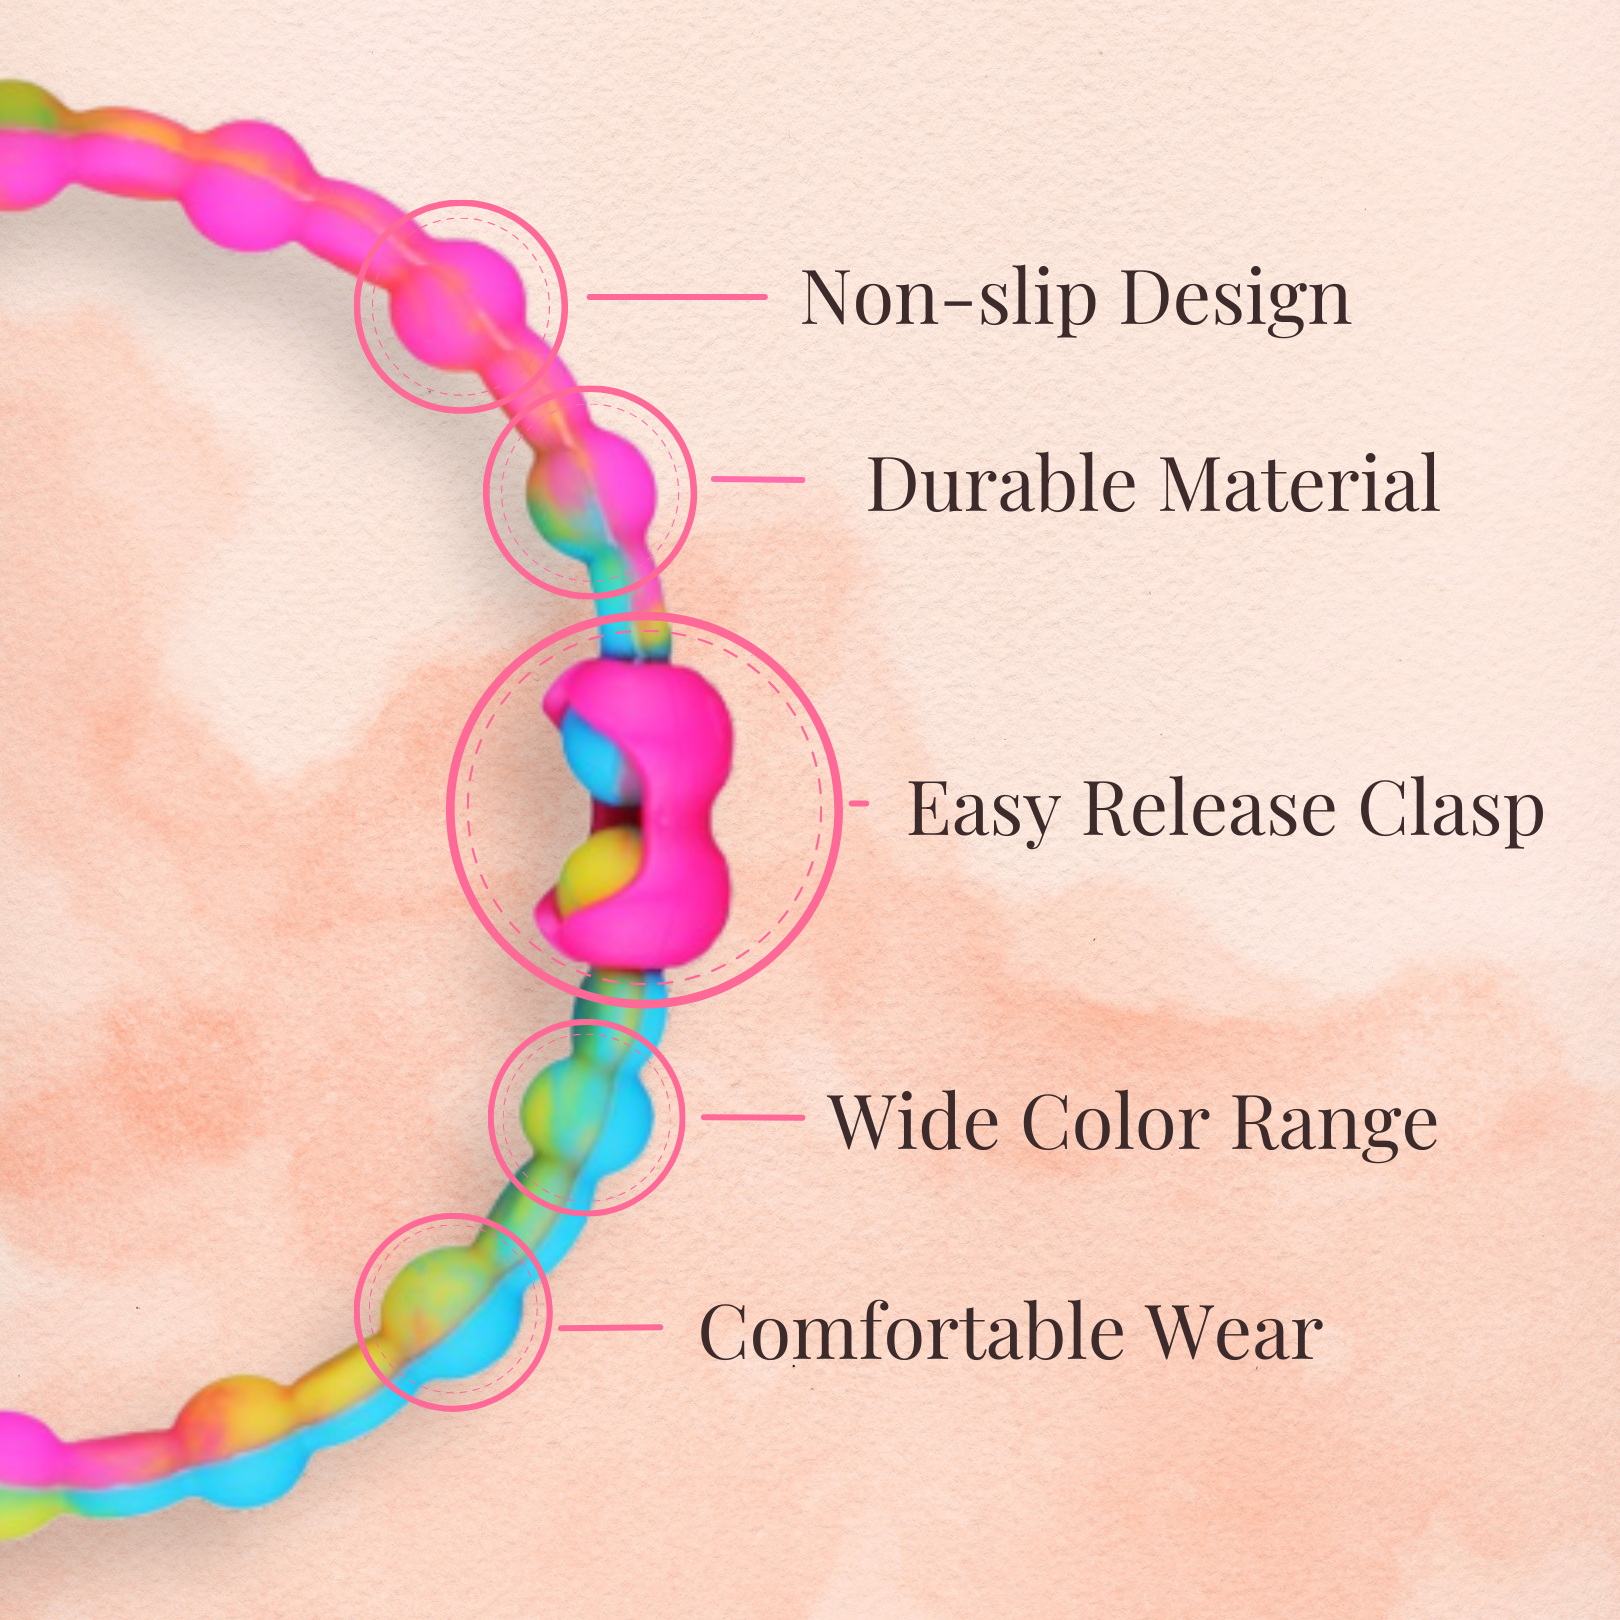 Autumn Embers Pack PRO Hair Ties: Easy Release Adjustable for Every Hair Type PACK OF 6